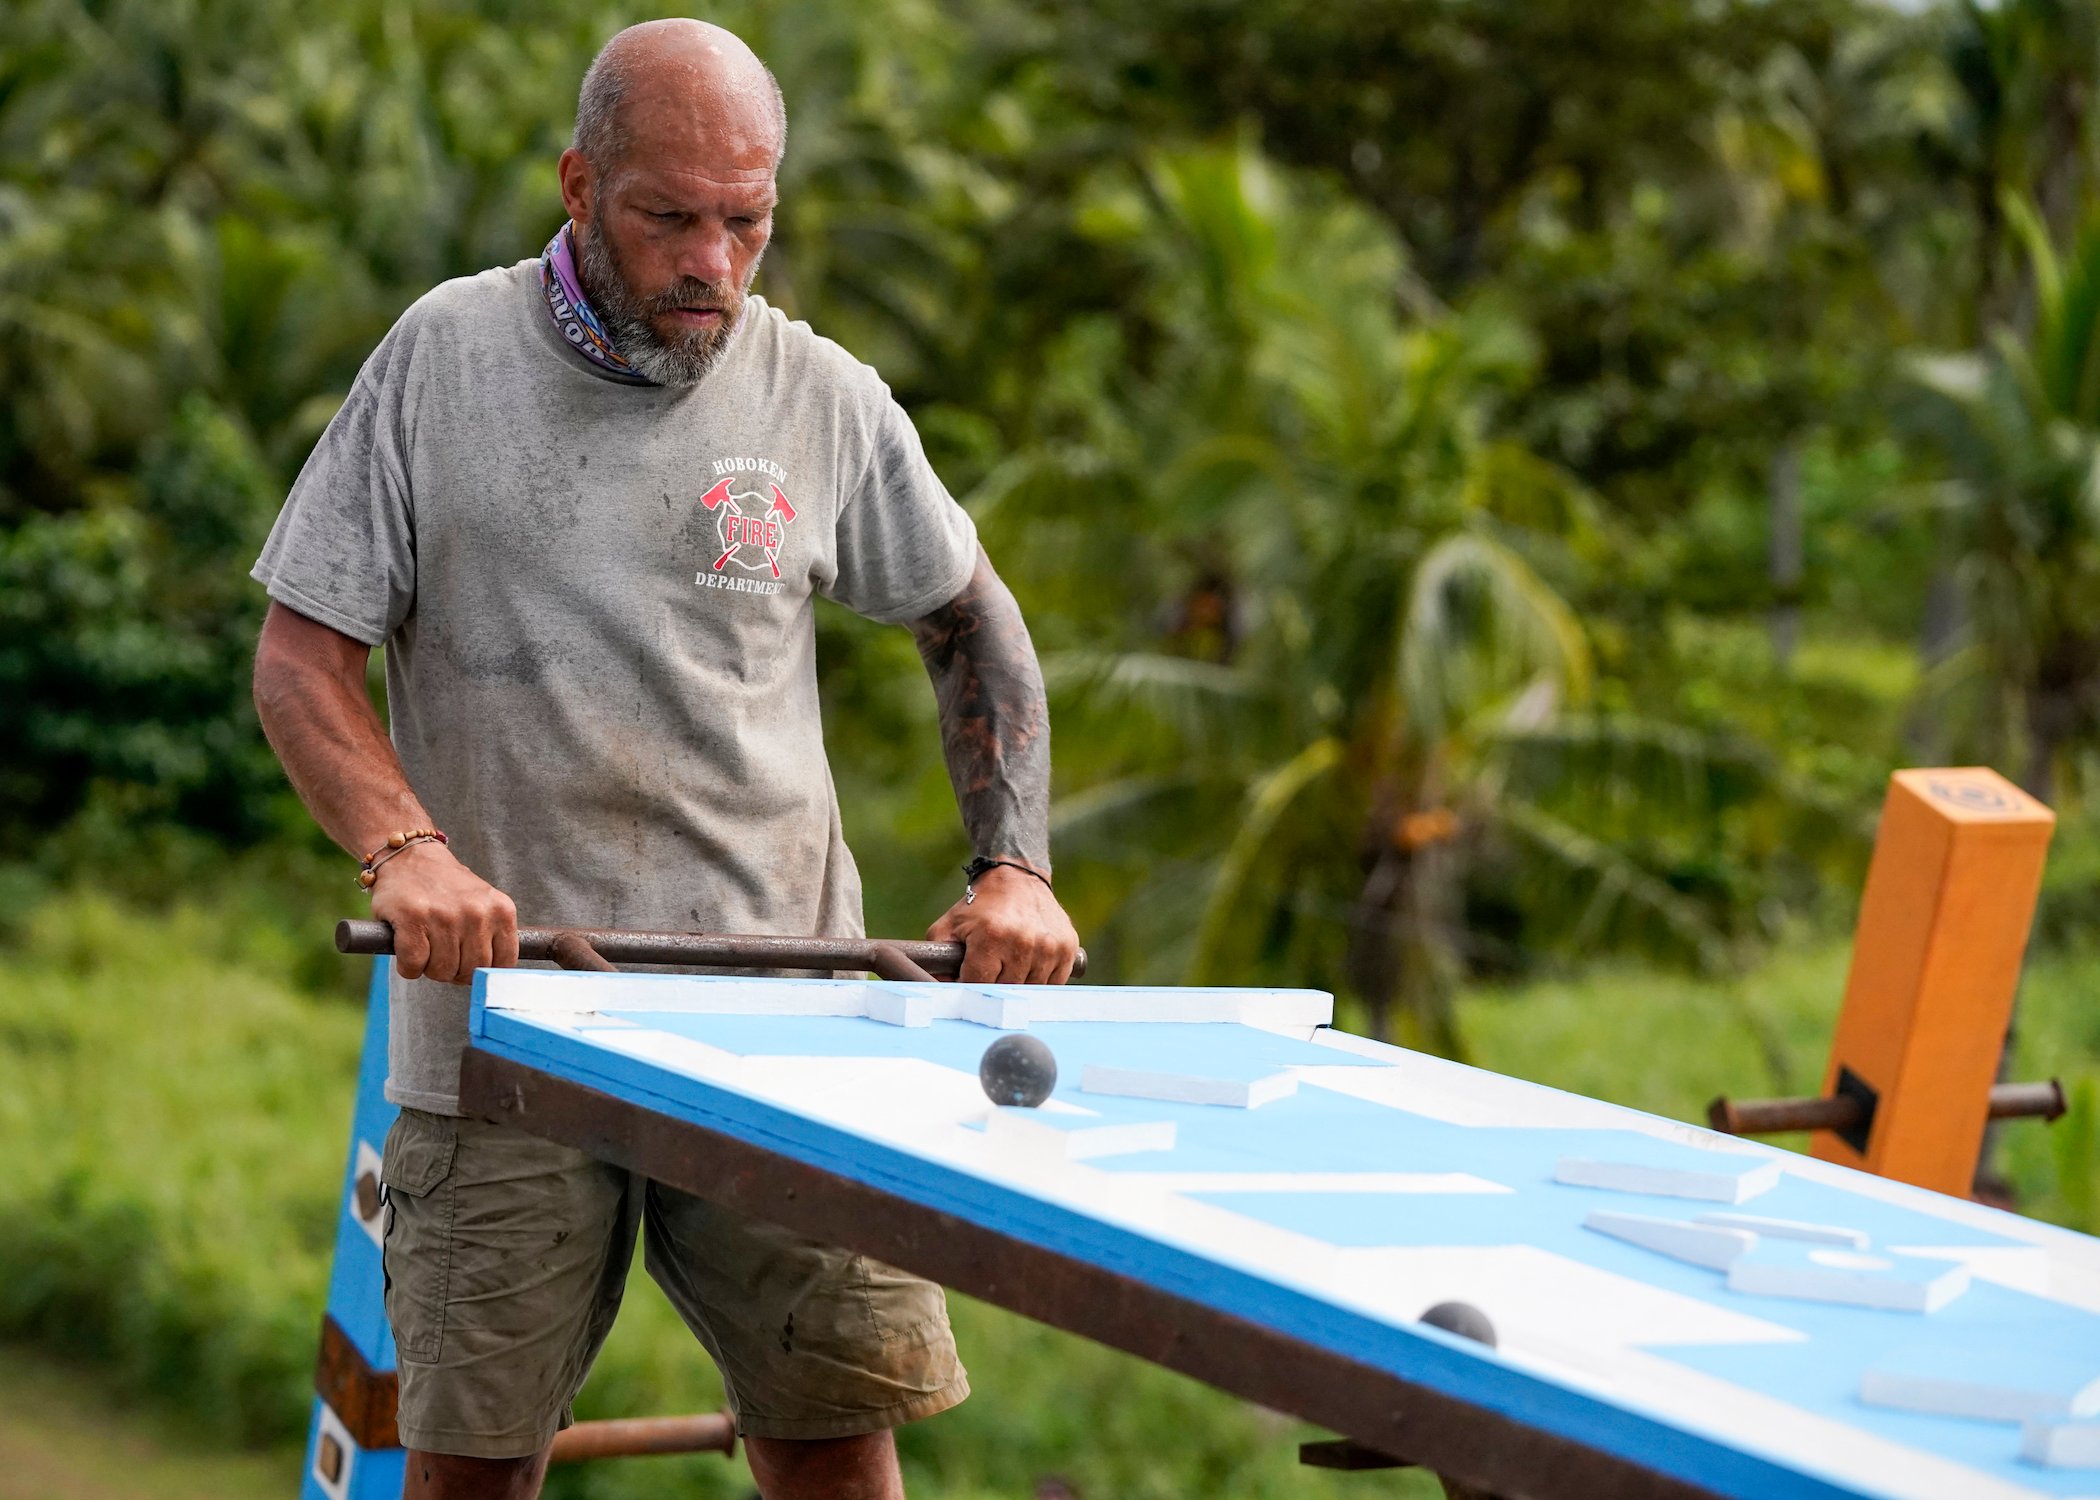 Mike Turner competing in a challenge in 'Survivor' Season 42